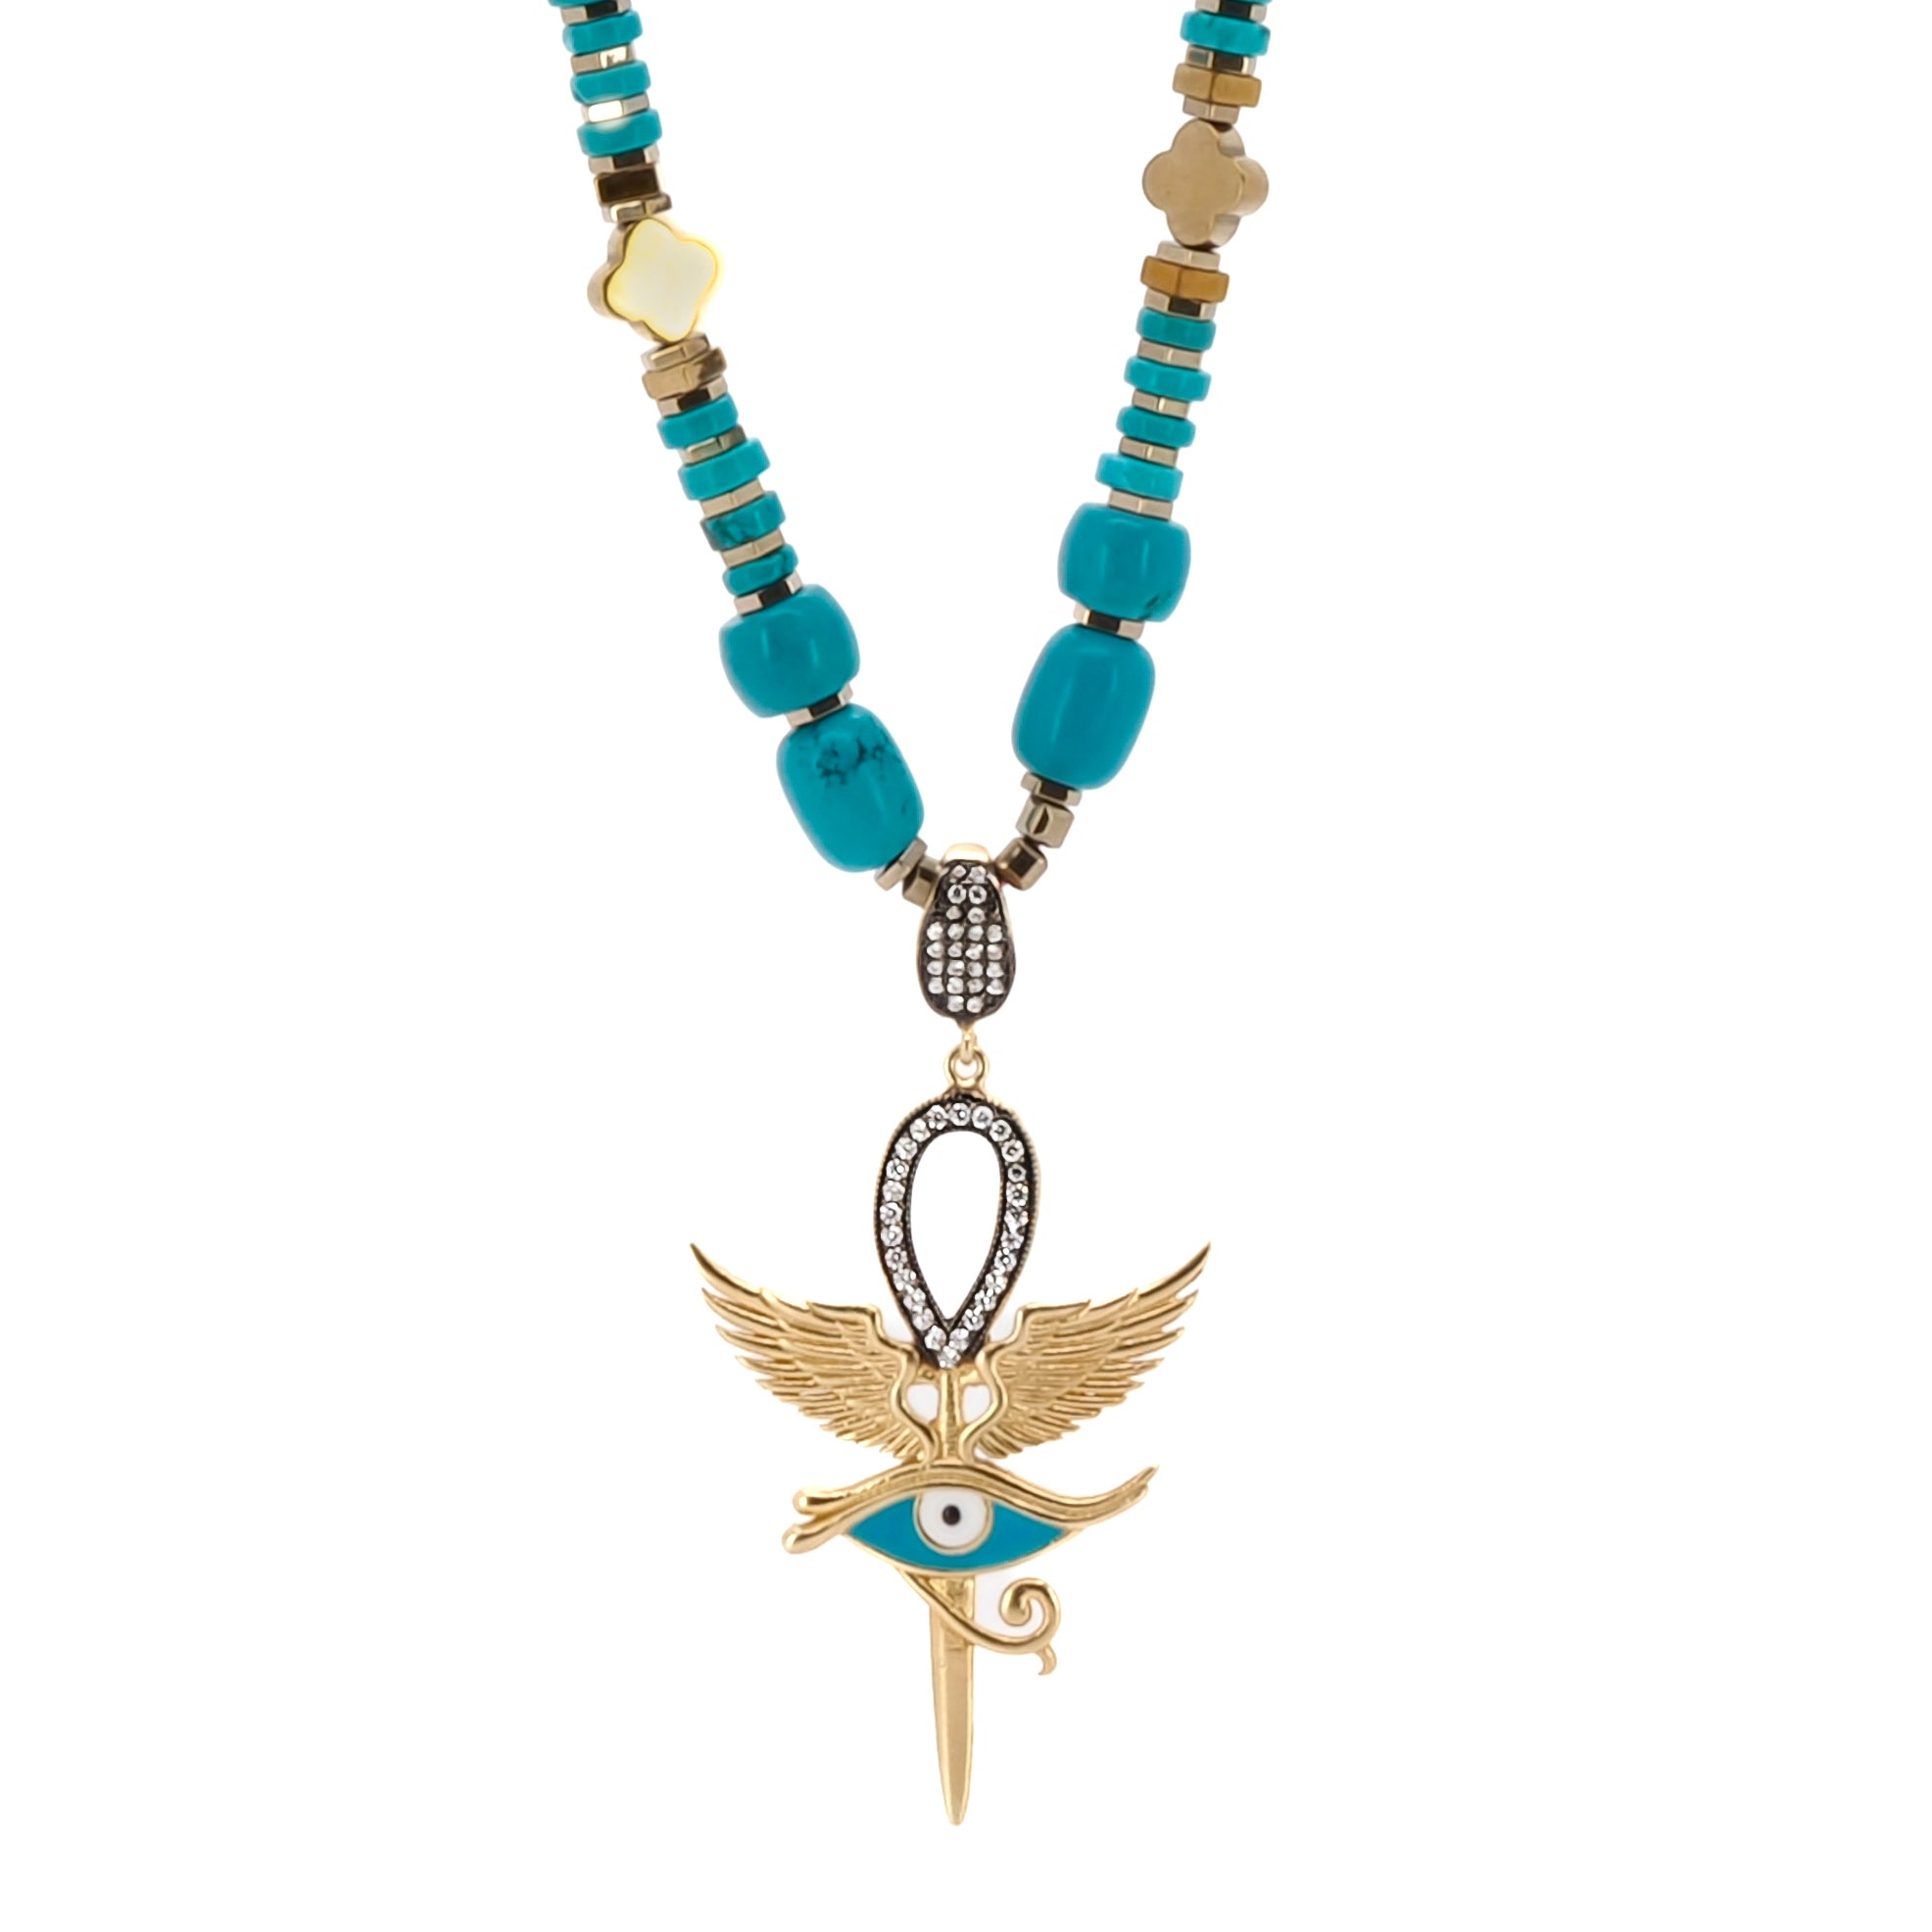 A close-up of the Unique Eye of Horus Turquoise Necklace, showcasing the intricate Eye of Horus pendant